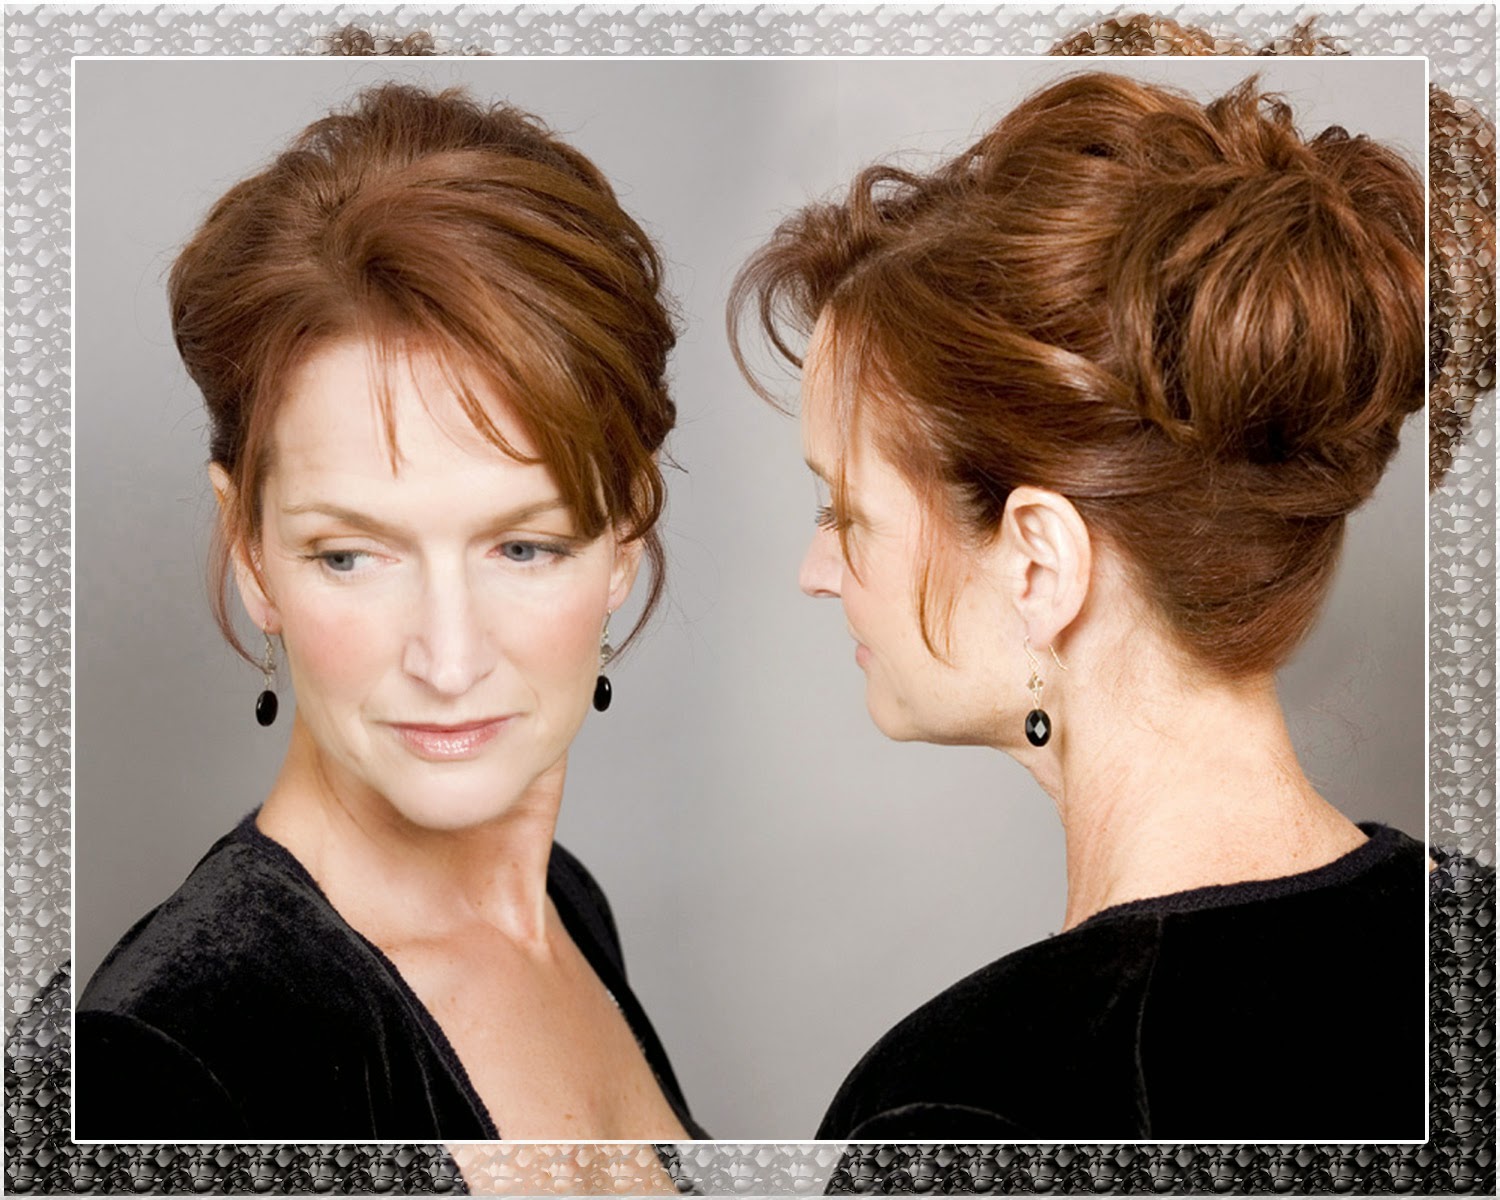 ... Hair: Wedding Hairstyles for Short Hair for Mother of The Bride